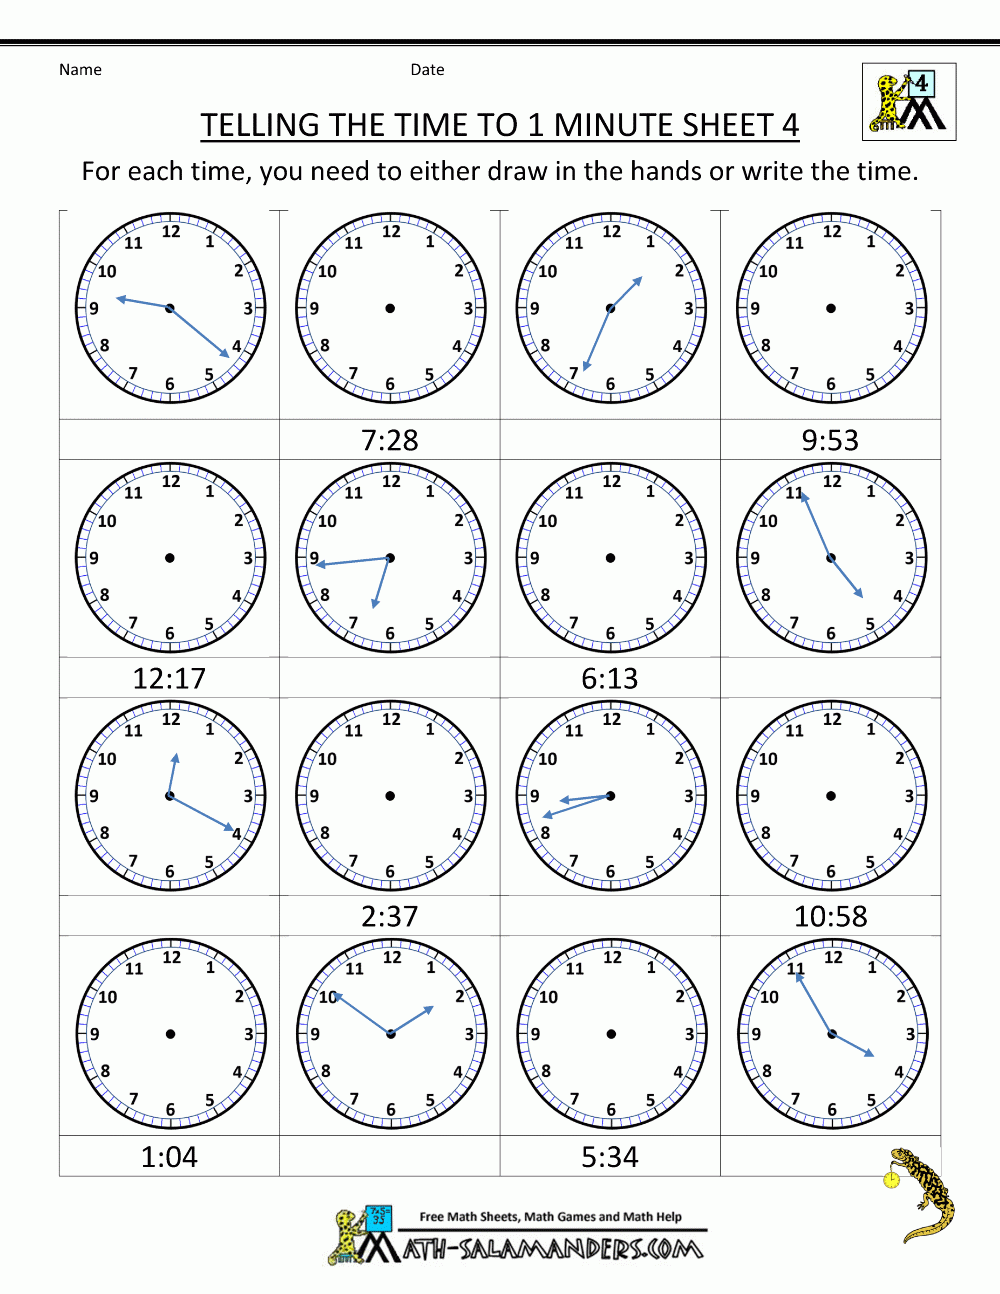 Printable Time Worksheets Telling The Time To 1 Min 4 | Time